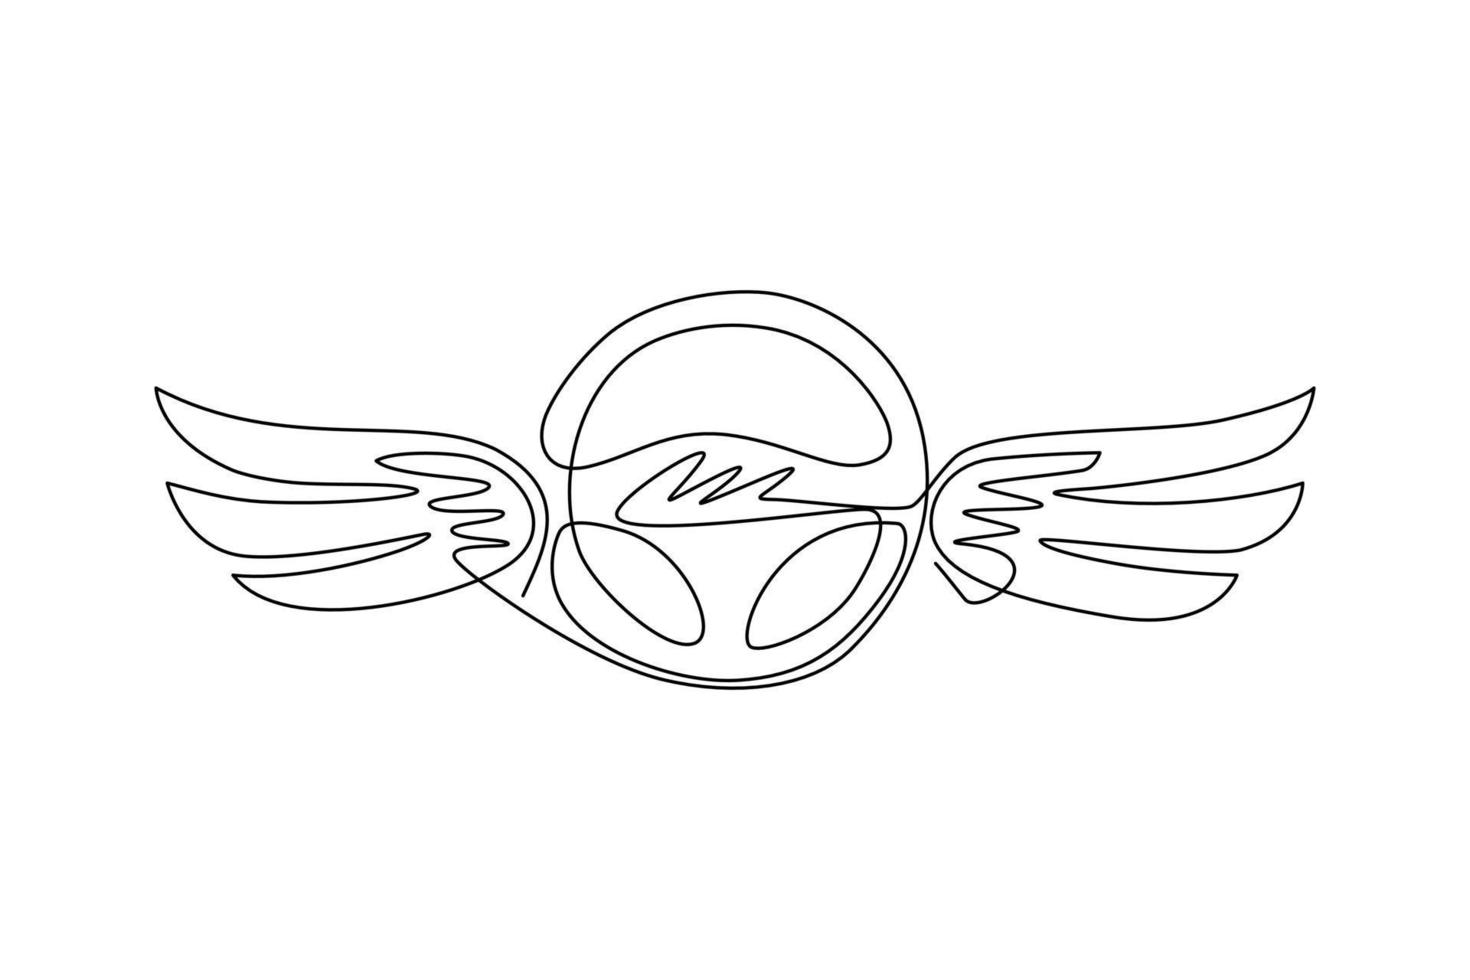 Continuous one line drawing steering wheel with wings. Driving school logo or symbol. Design flat element for emblem, sticker, badge, label, icon. Single line draw design vector graphic illustration